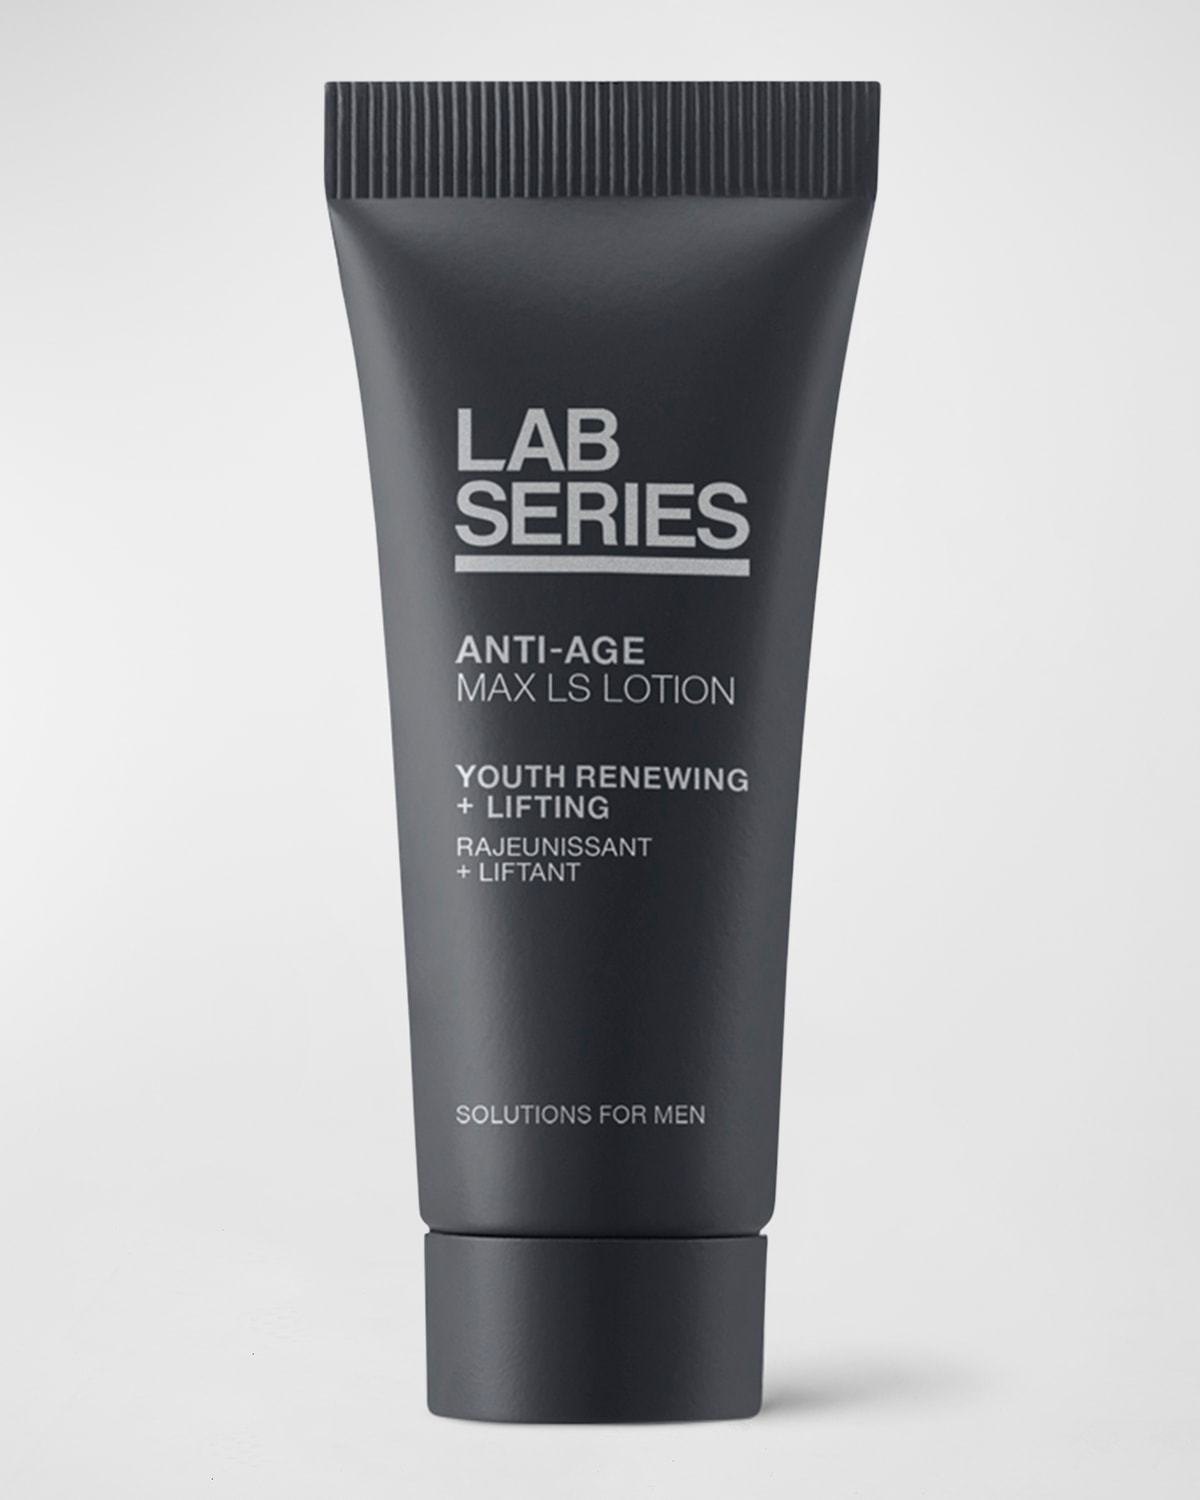 0.67 oz. Anti-Age Max LS Lotion, Yours with any $75 Lab Series for Men Purchase